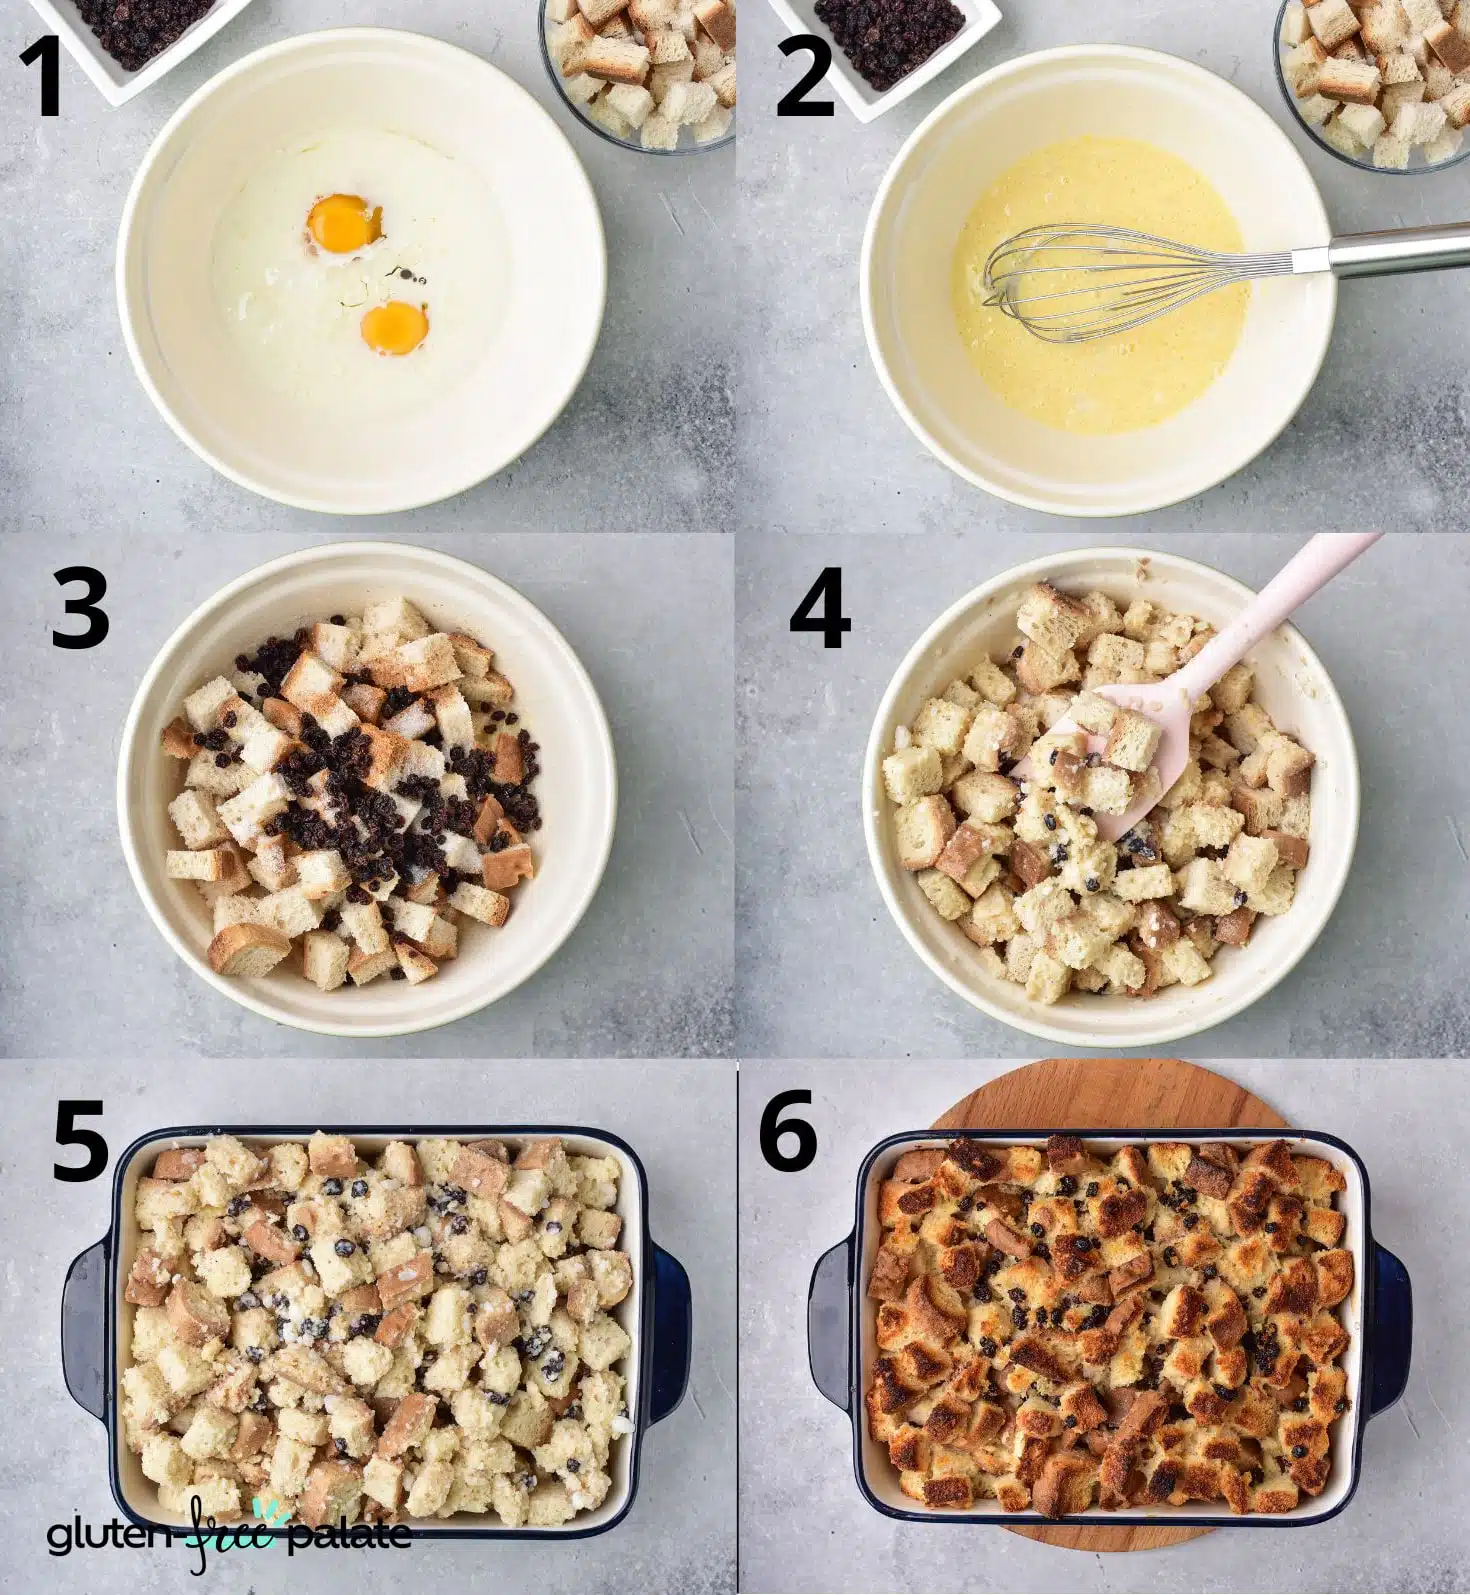 Gluten-free bread pudding step by step